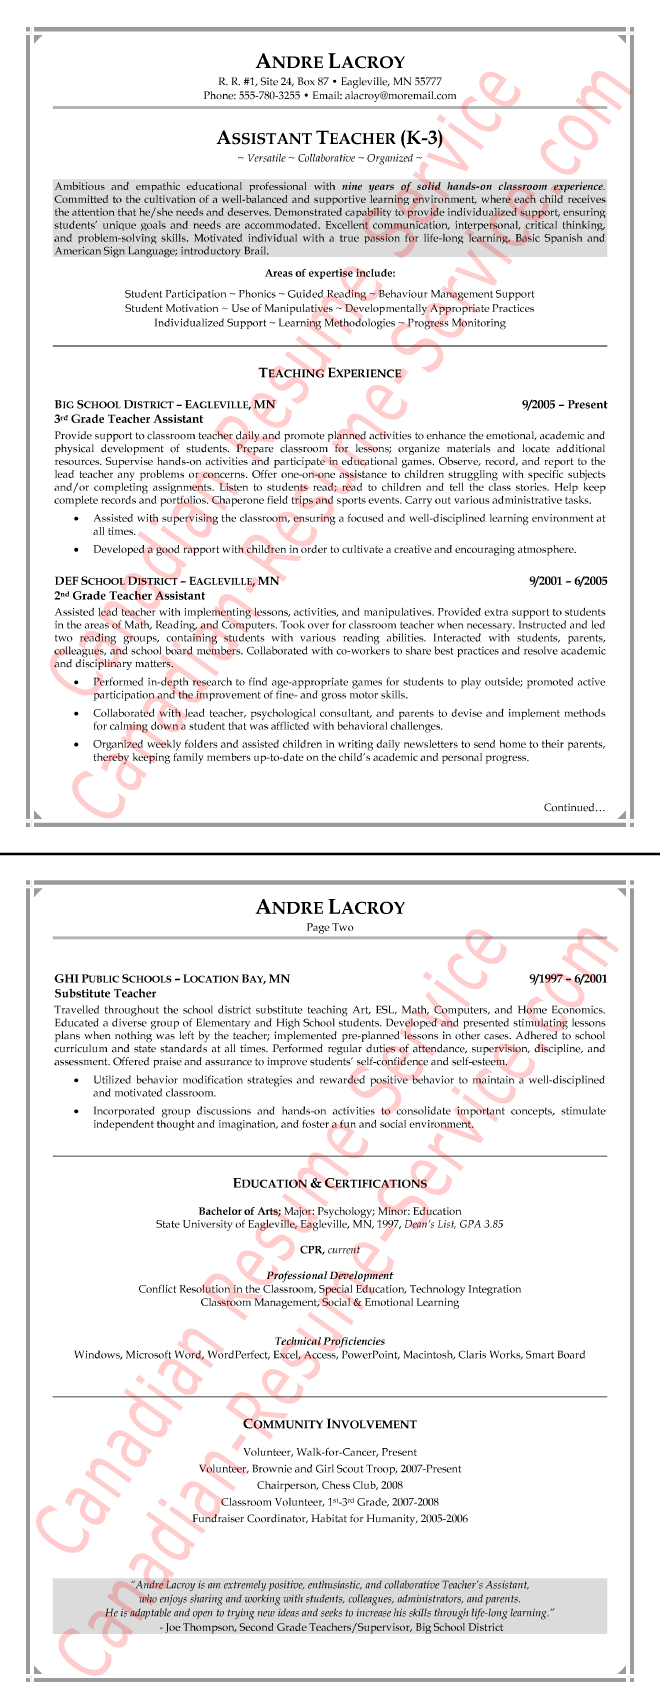 Sample resume for a teaching assistant